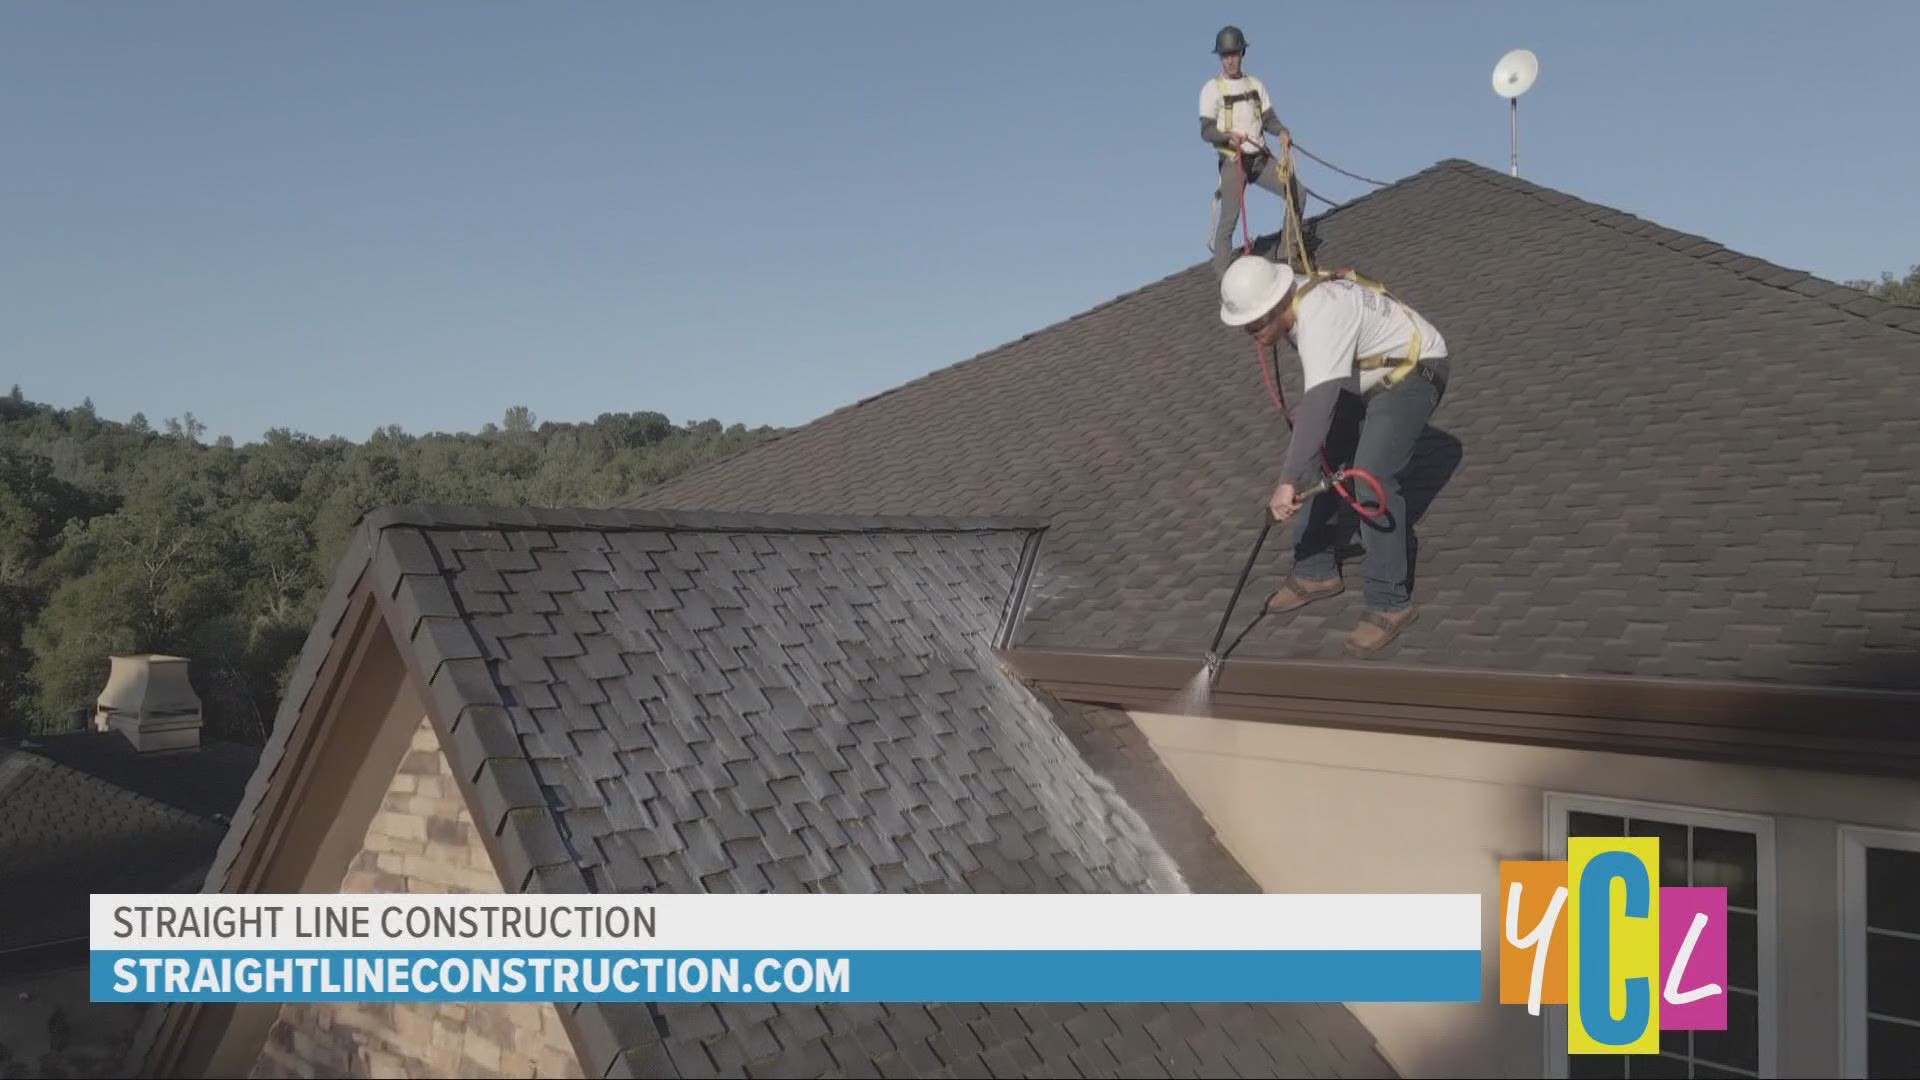 Get the need to know details in order to keep your home's roof in tip top shape throughout the year. 
This segment was paid for by Straight Line Construction.